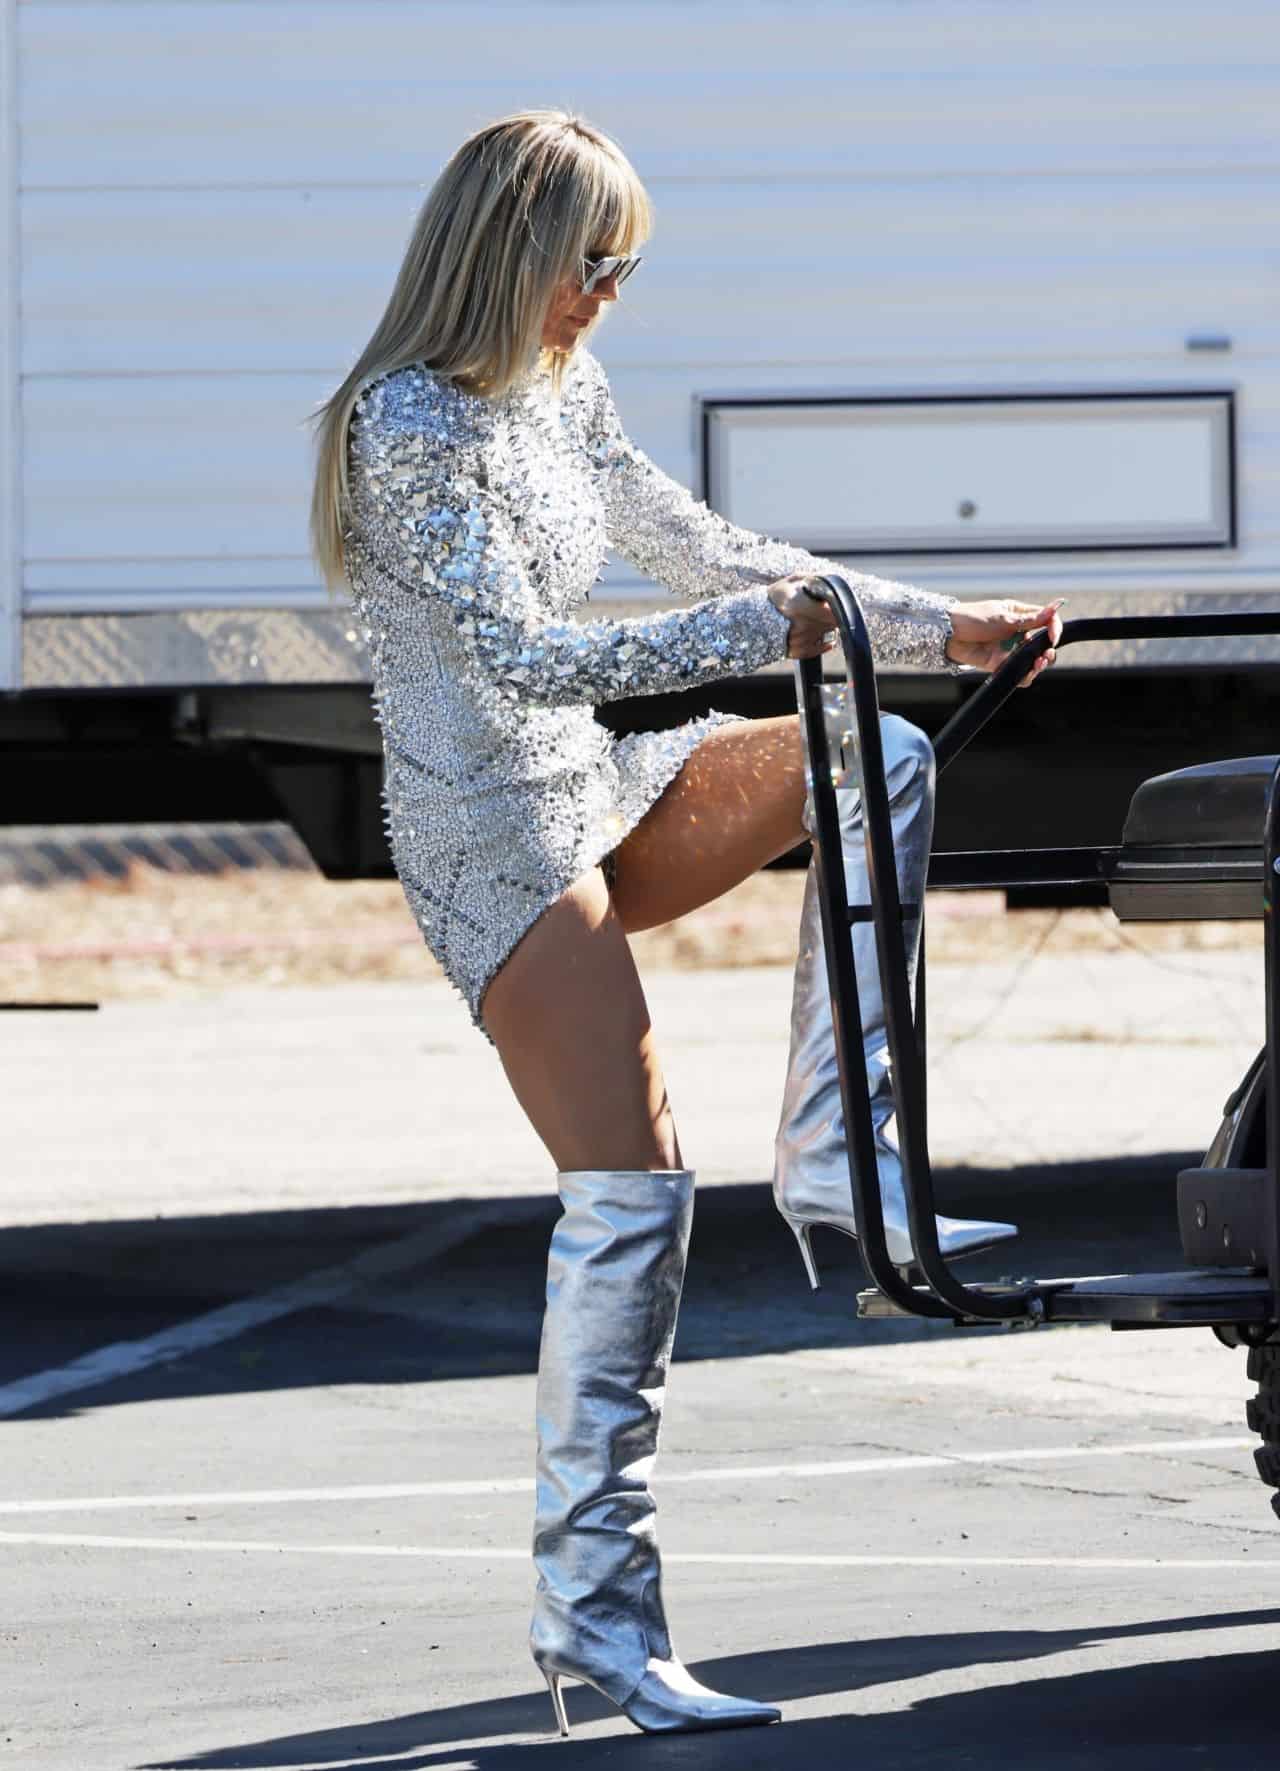 Heidi Klum Shows Off Her Legs in a Sparkly Silver Dress on the Set of GNTM